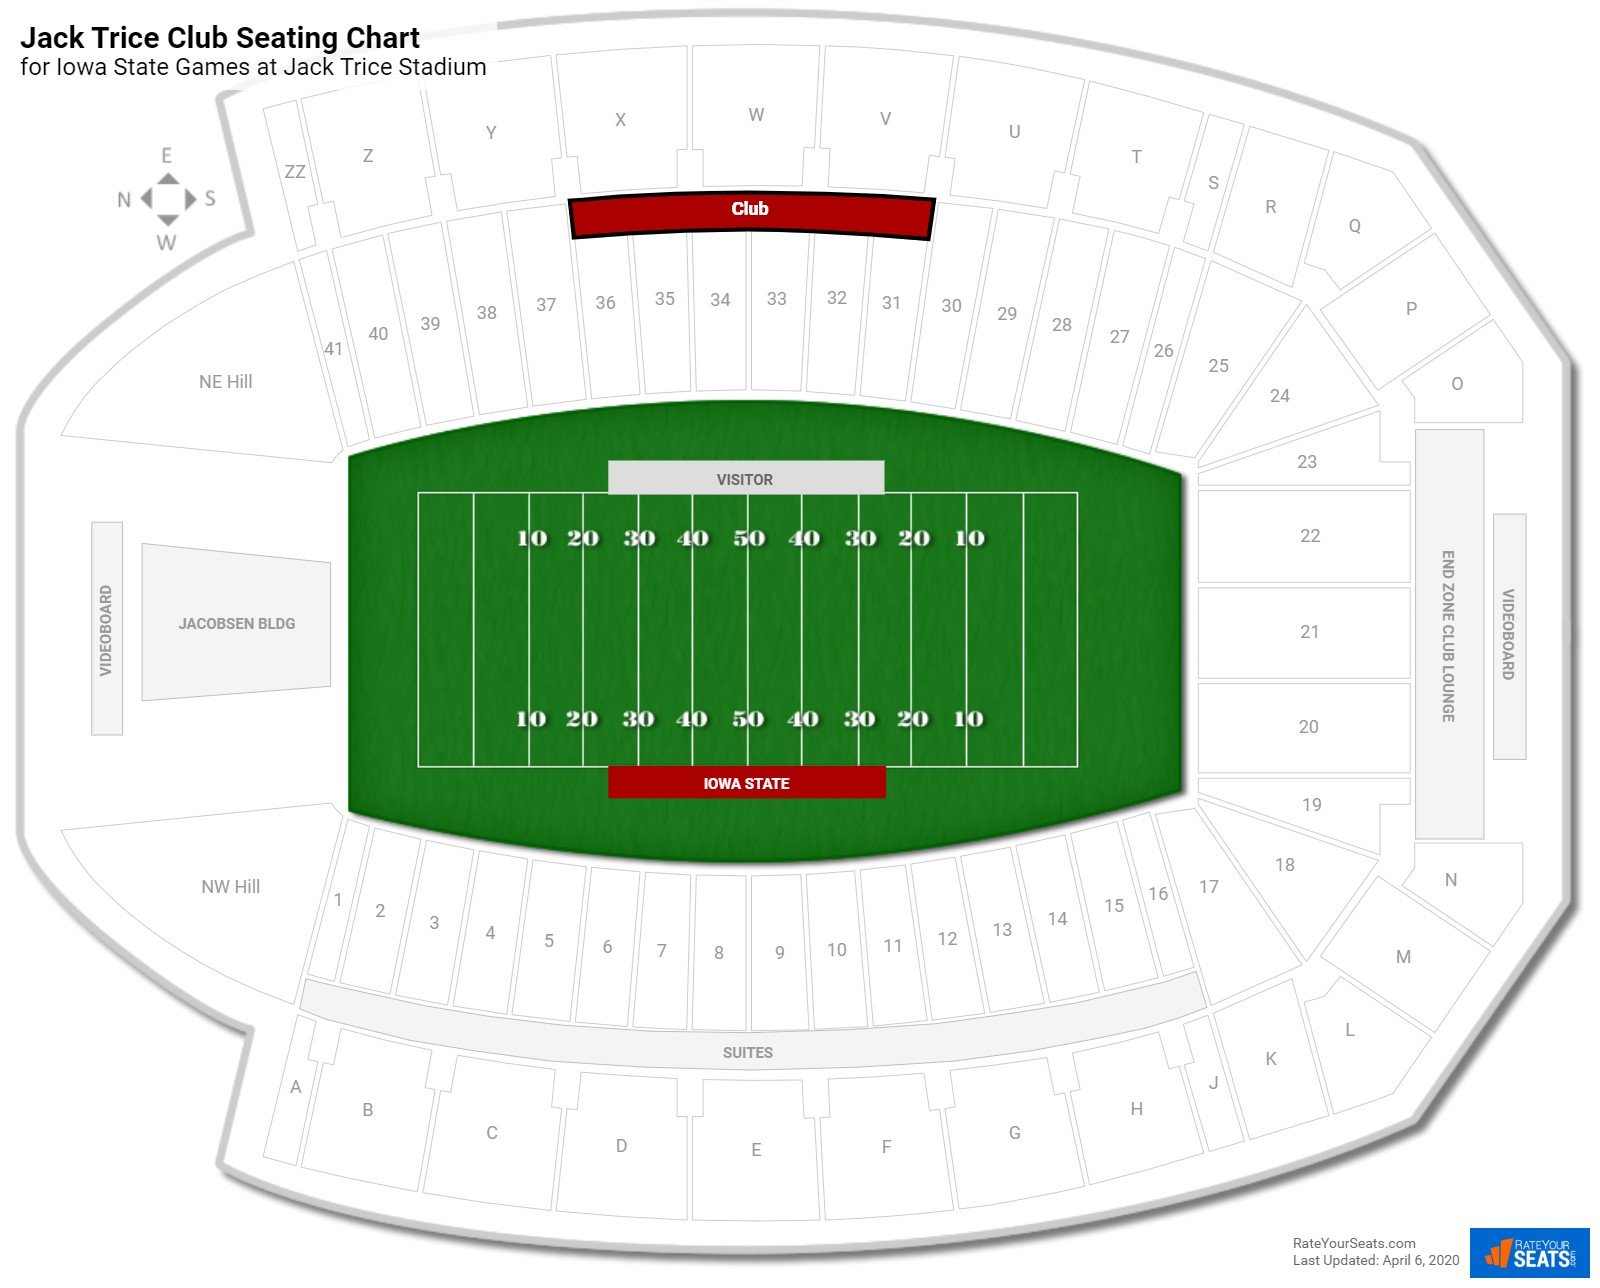 Jack Trice Seating Chart 2019